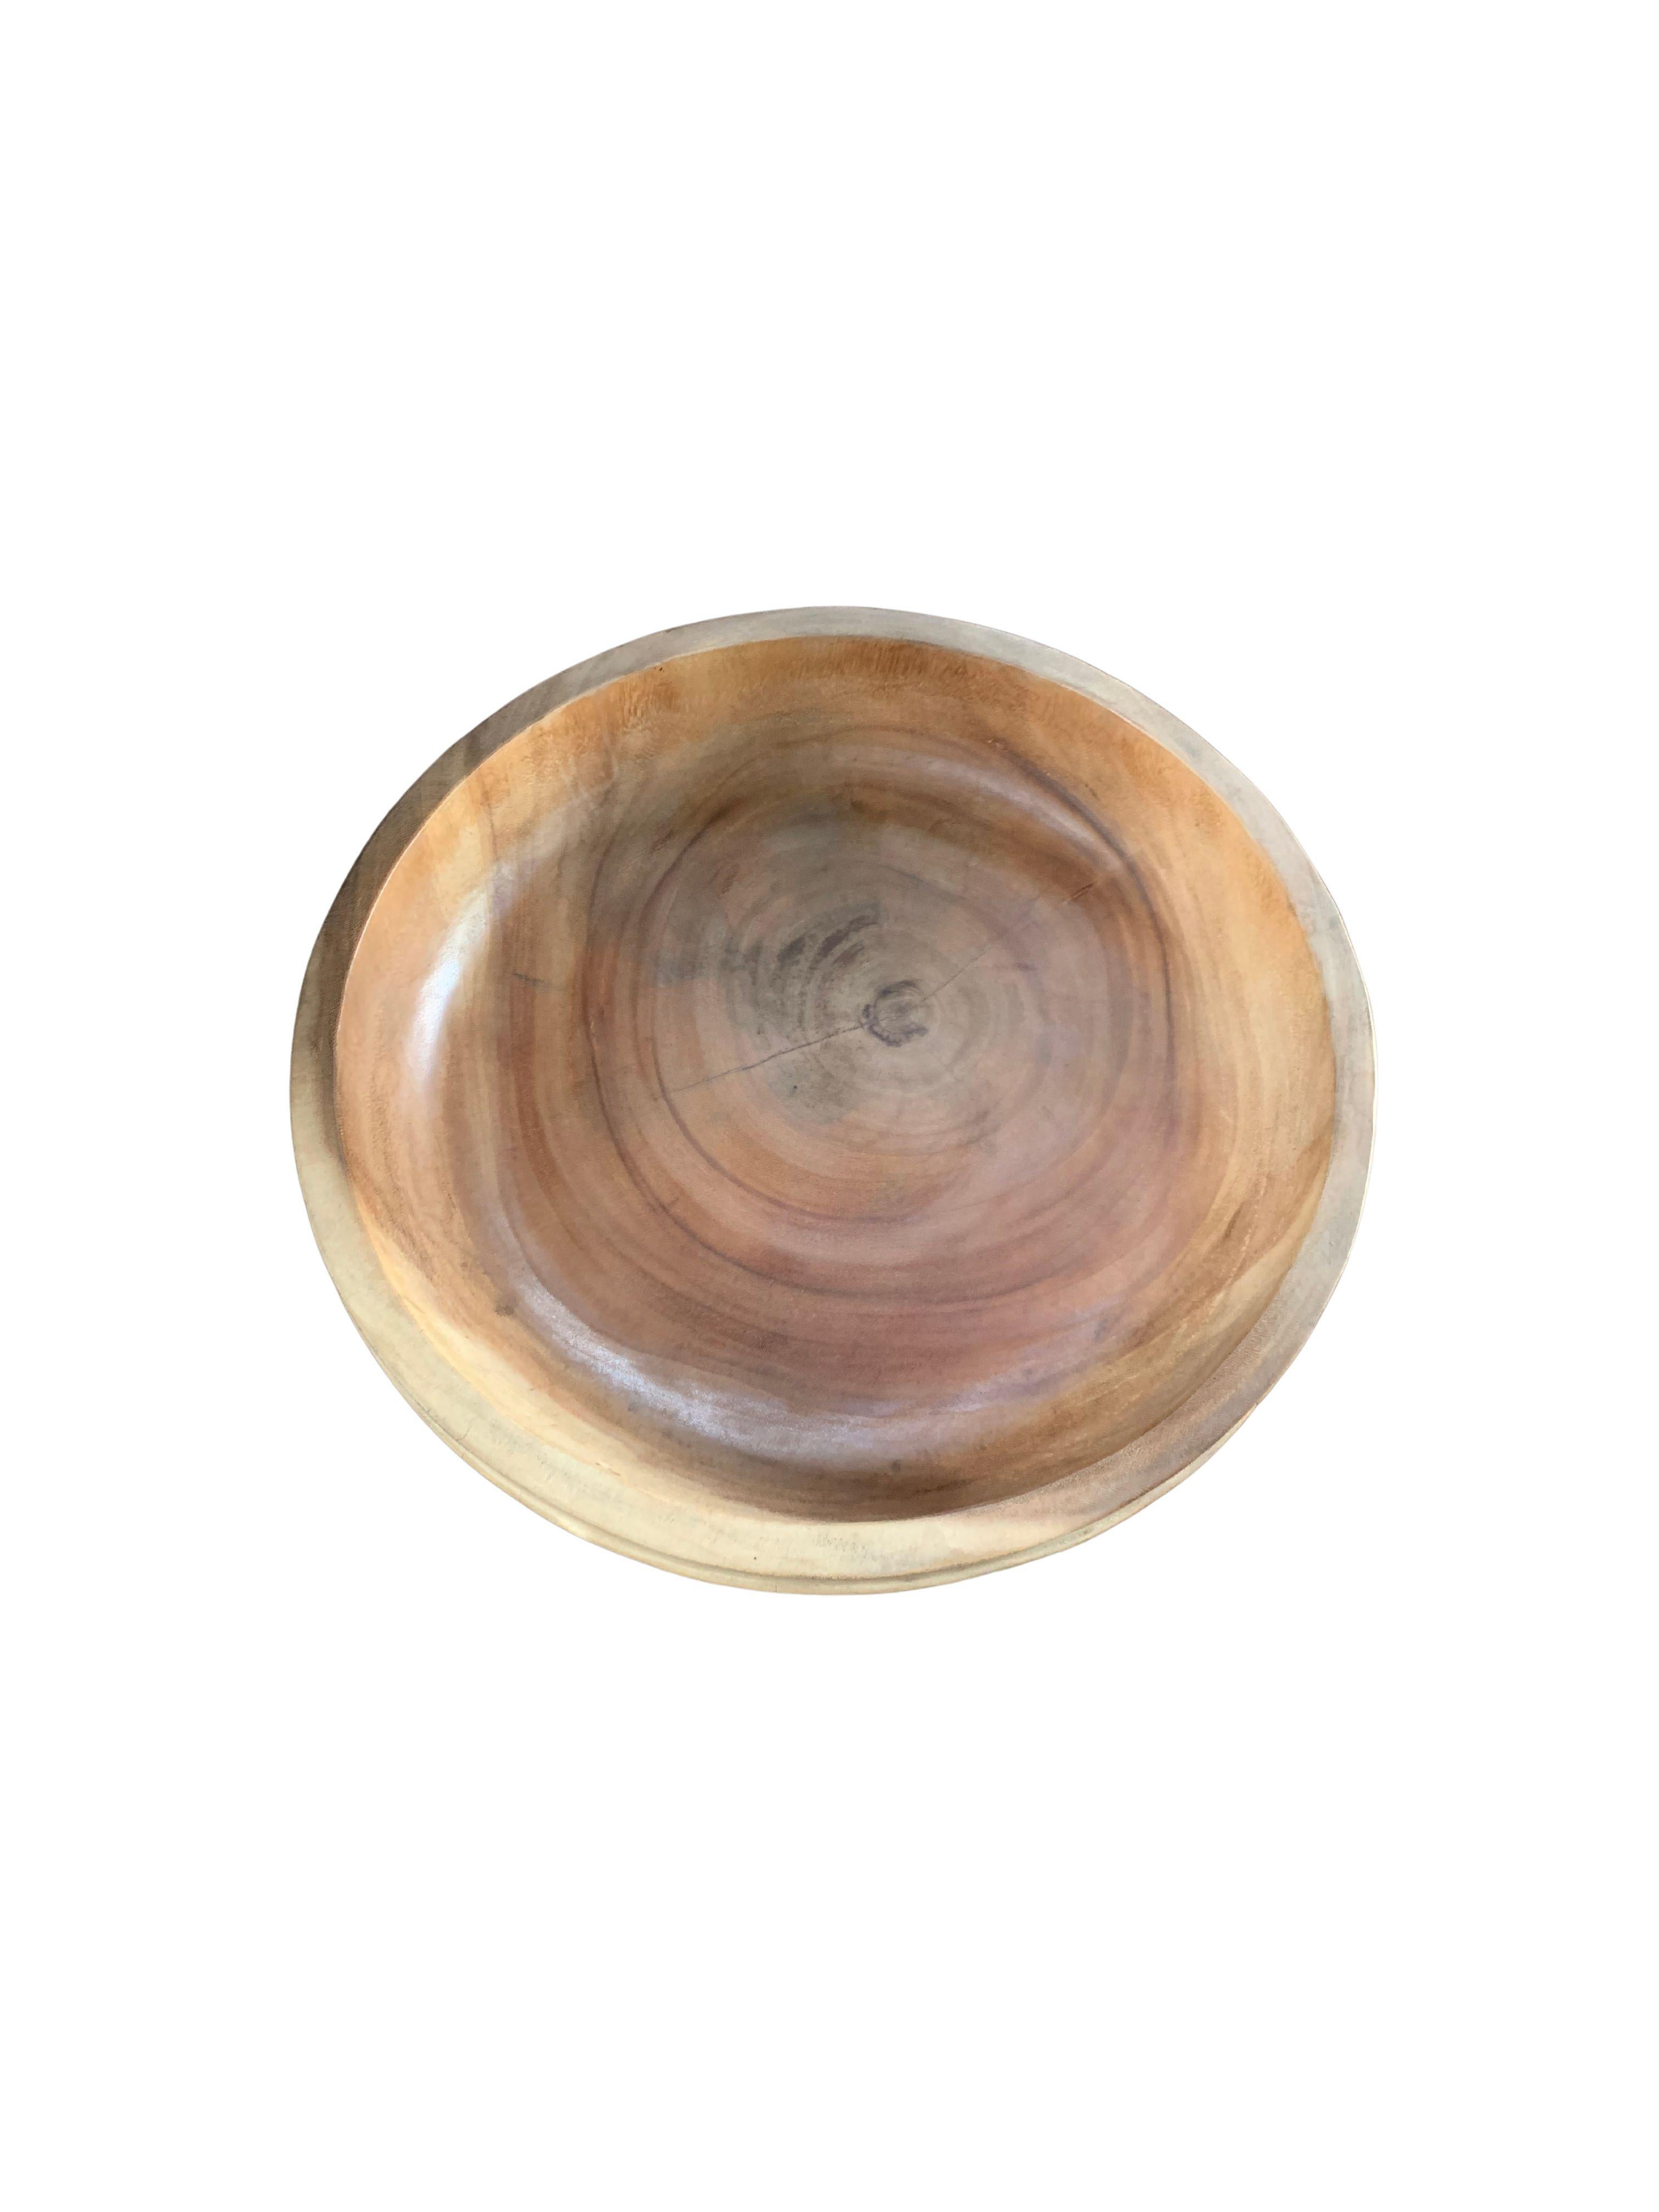 Organic Modern Solid Mango Wood Bowl with Smooth Natural Finish Modern Organic For Sale